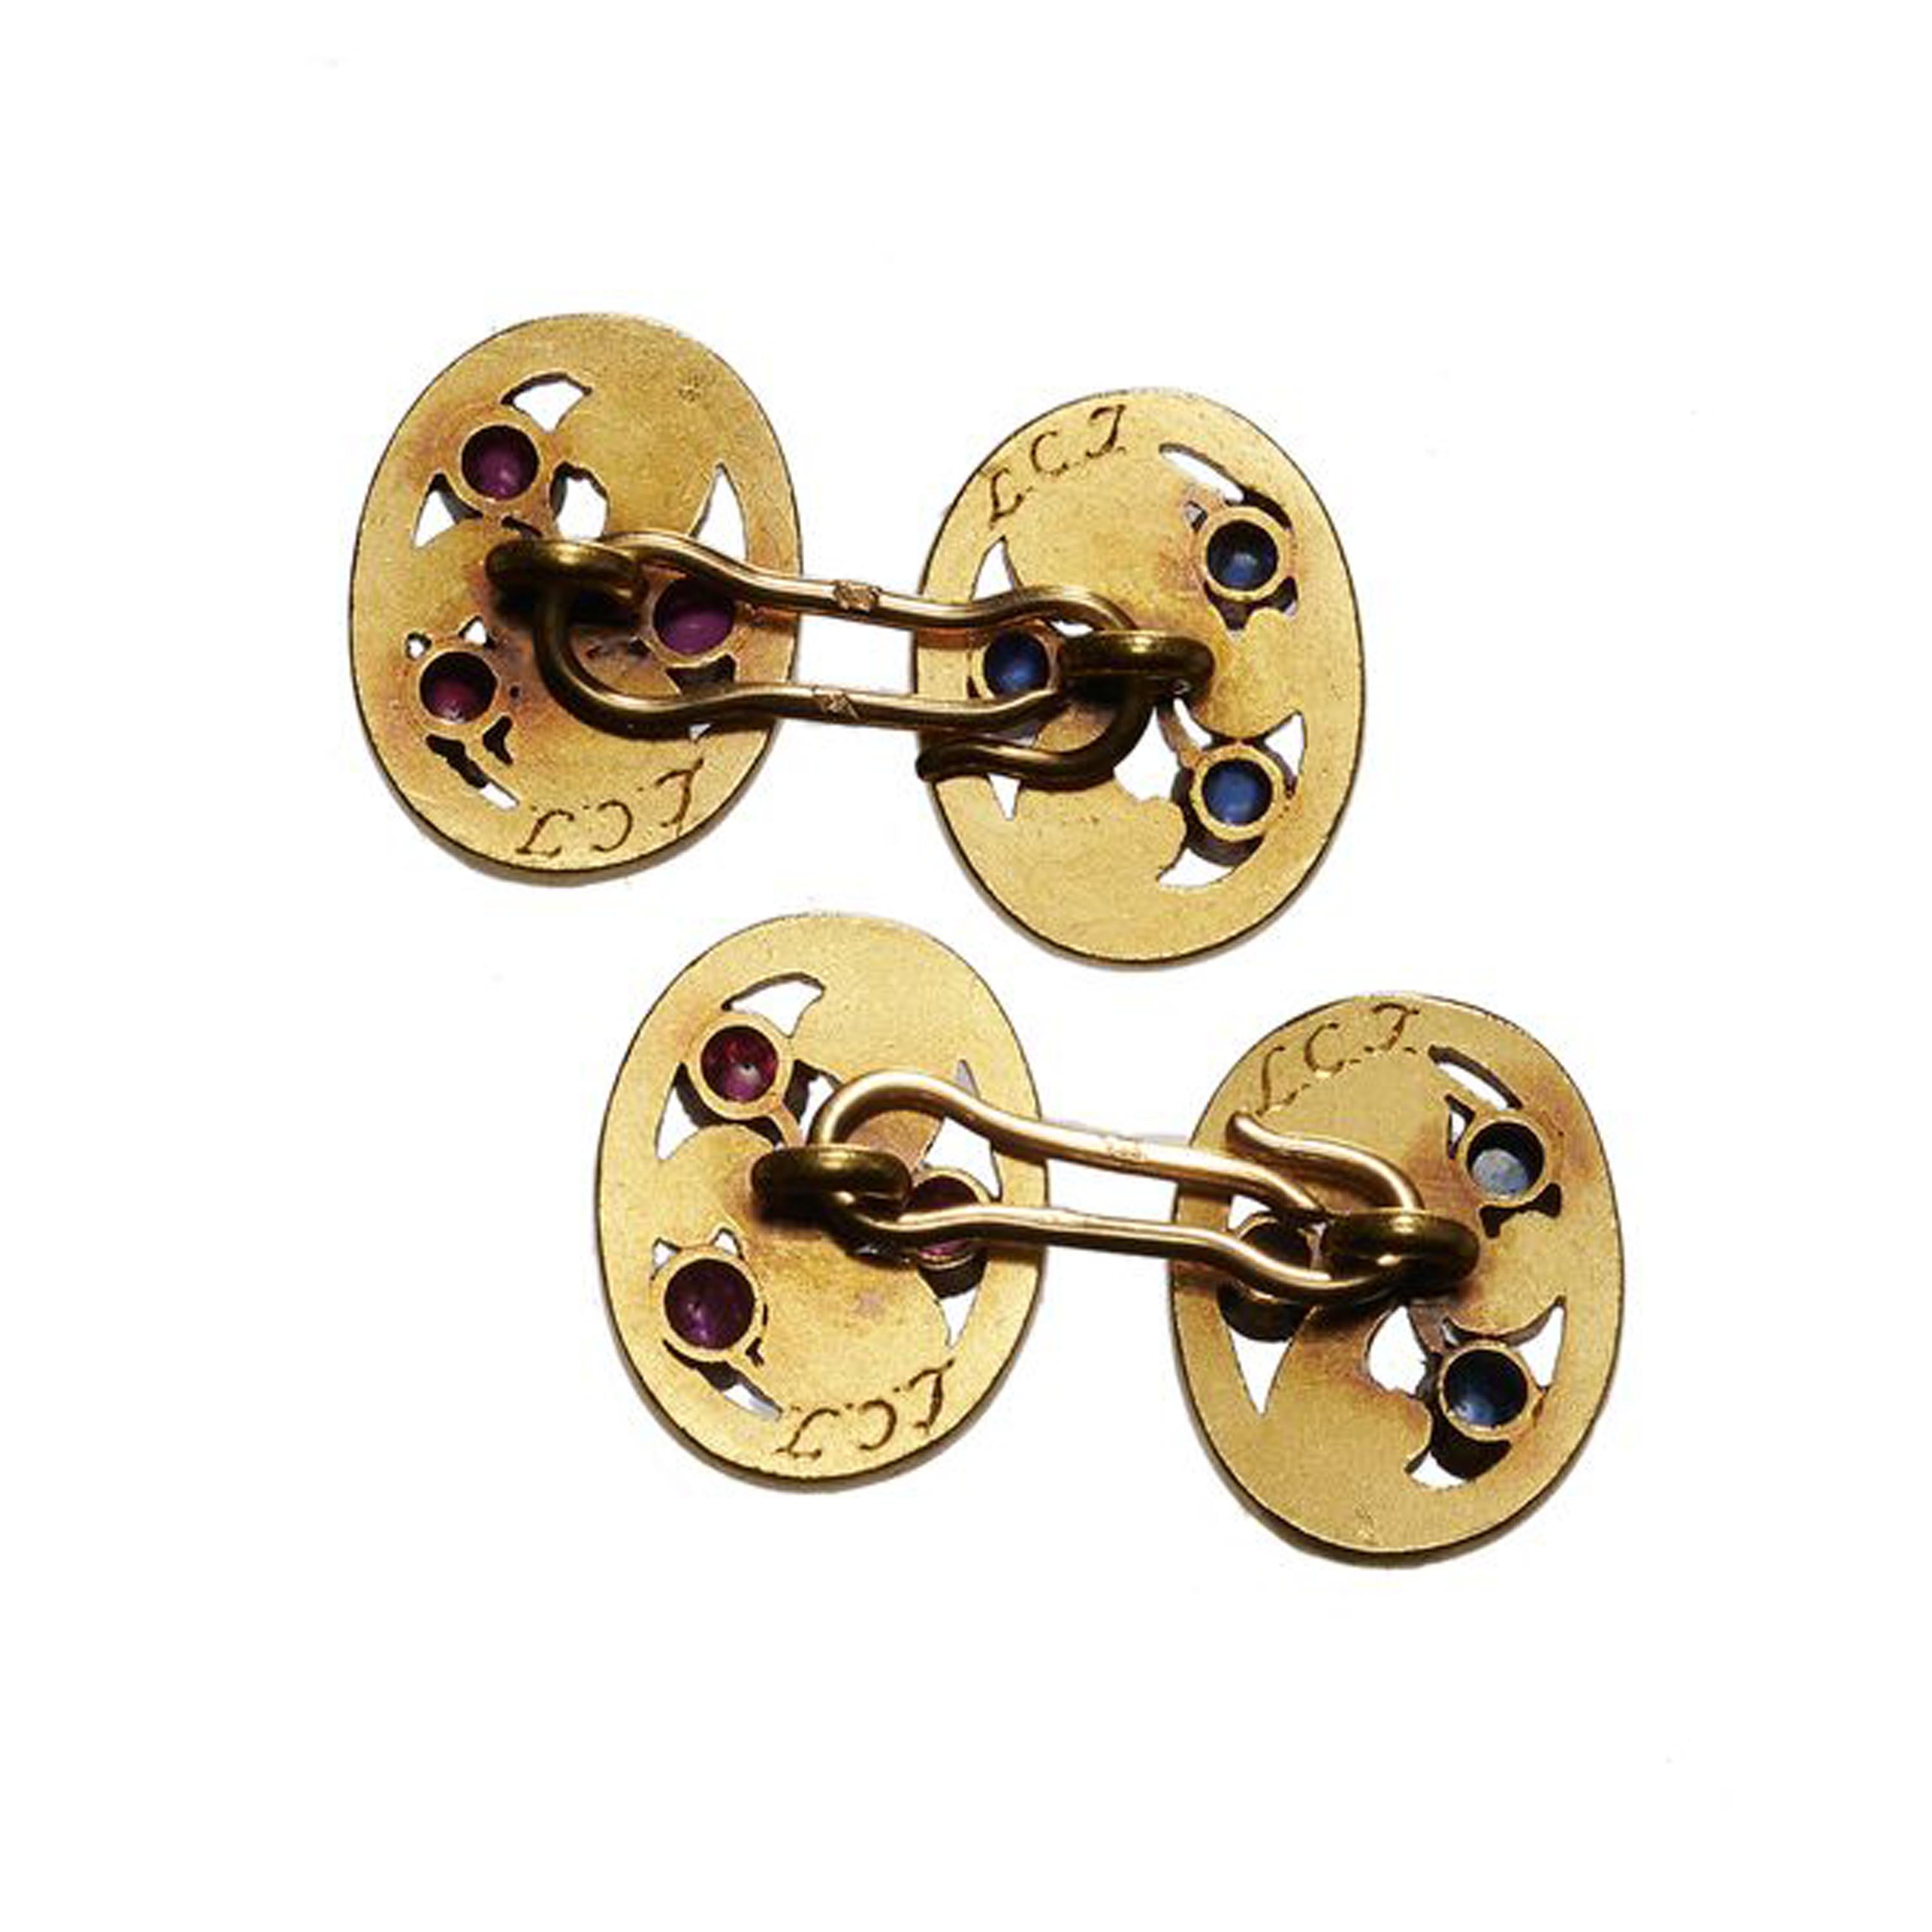 Tiffany & Co. Art Nouveau Sapphire Ruby and Gold Cufflinks, Circa 1890 For Sale 4